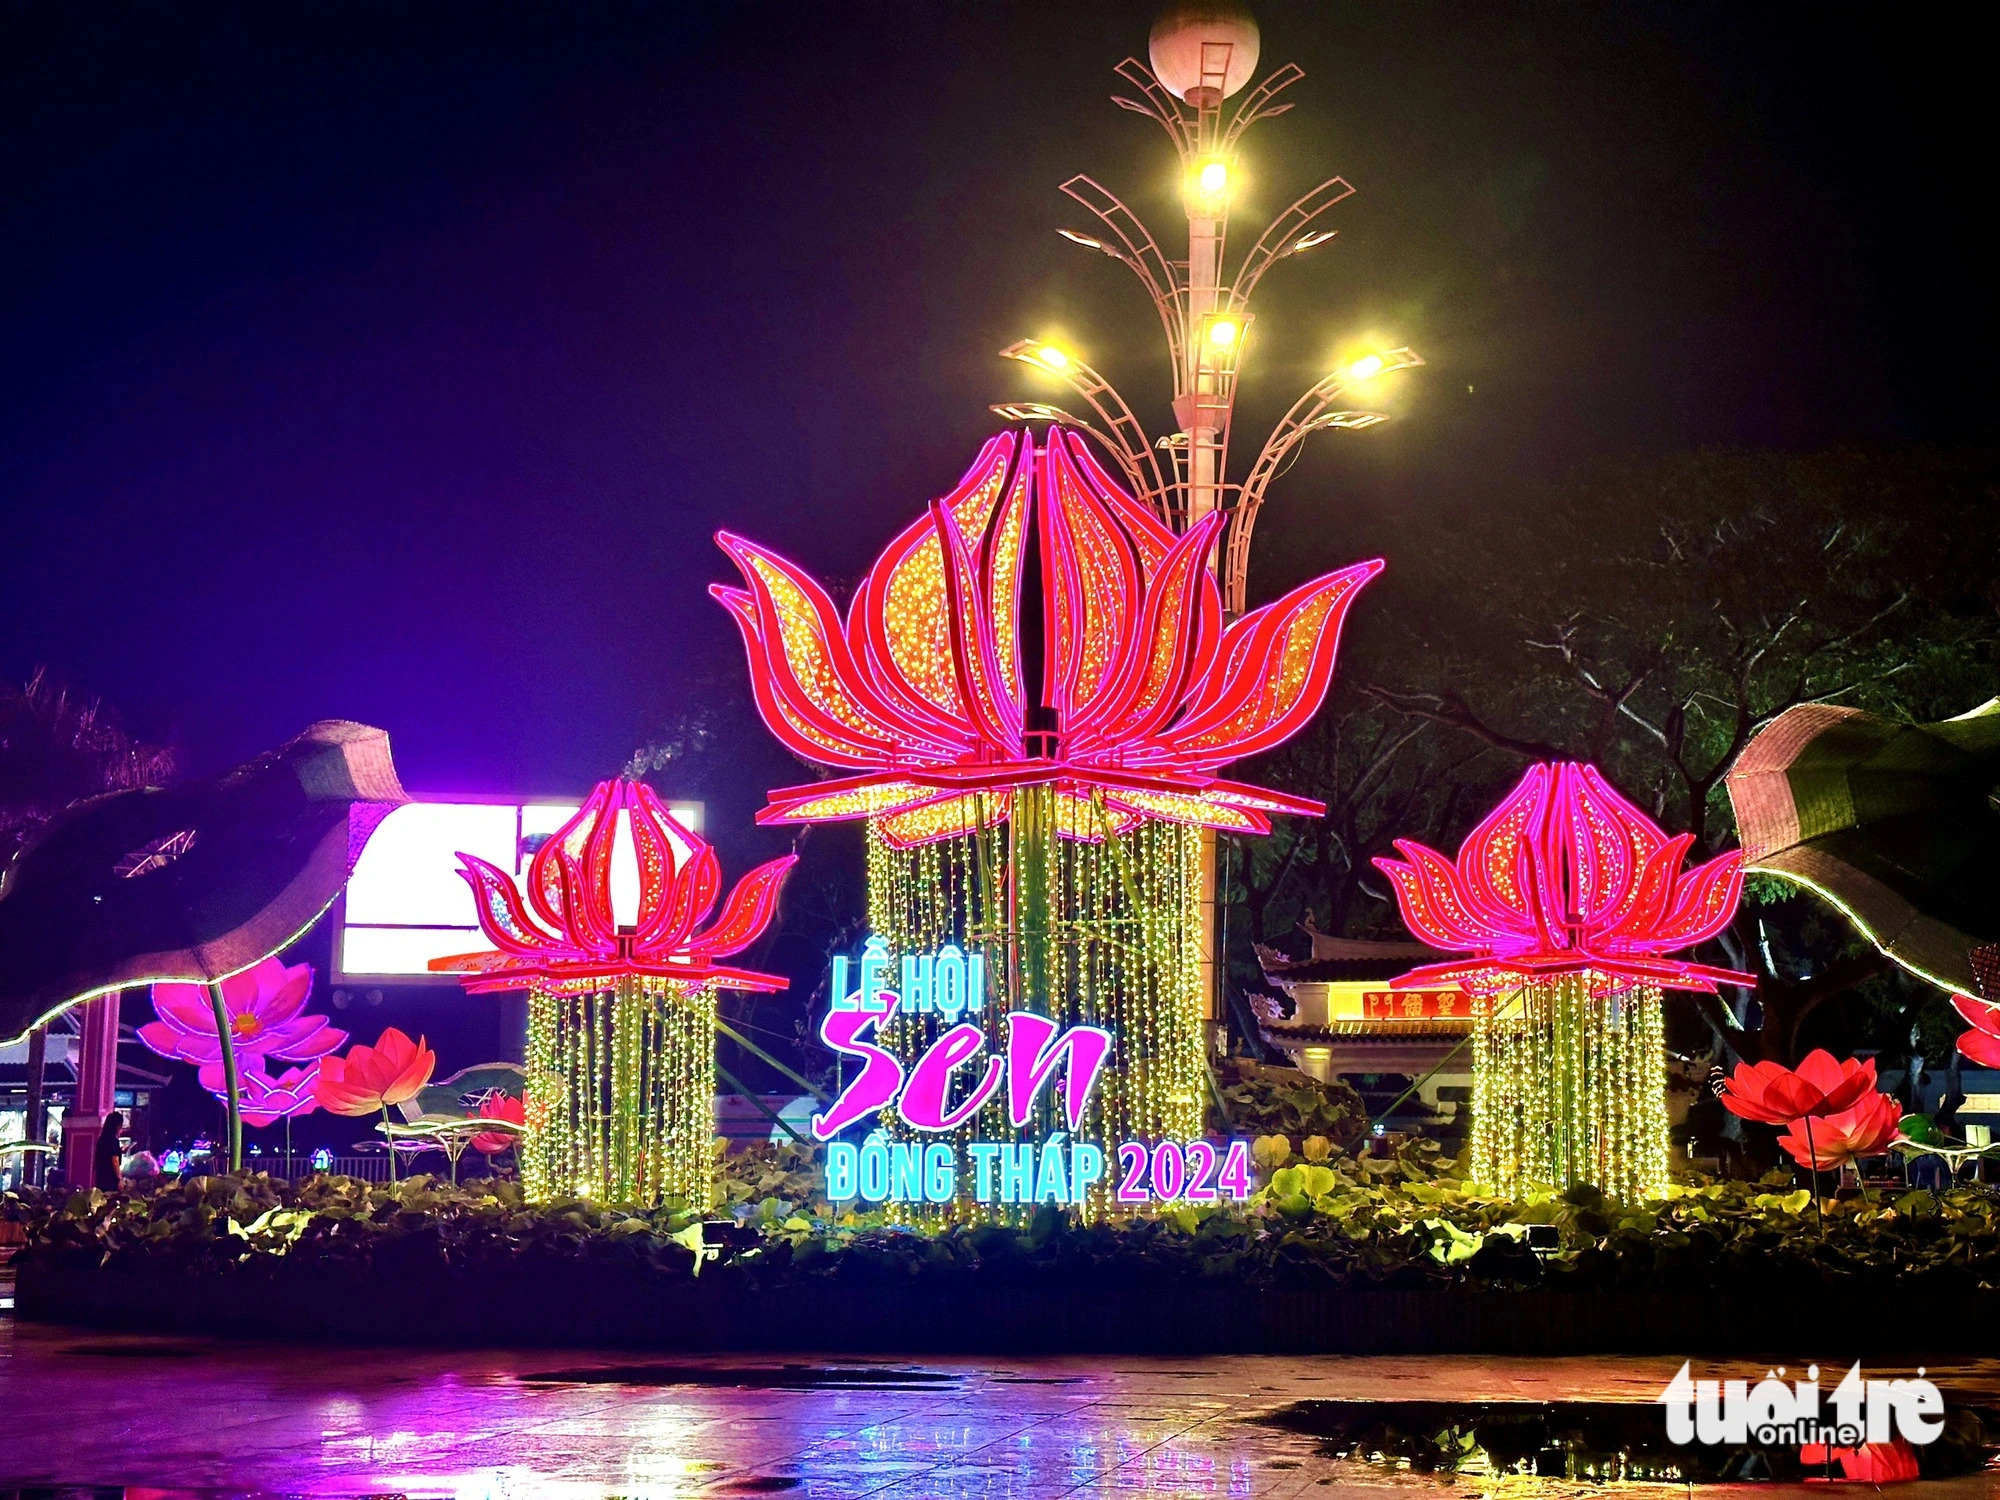 2nd lotus festival kicks off in Vietnam’s Dong Thap